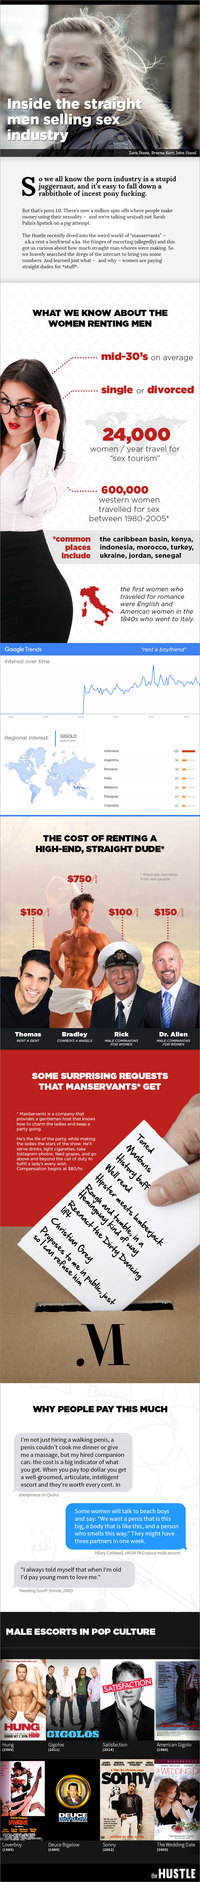 straight men photos assets sexinfographic inside straight men selling industry